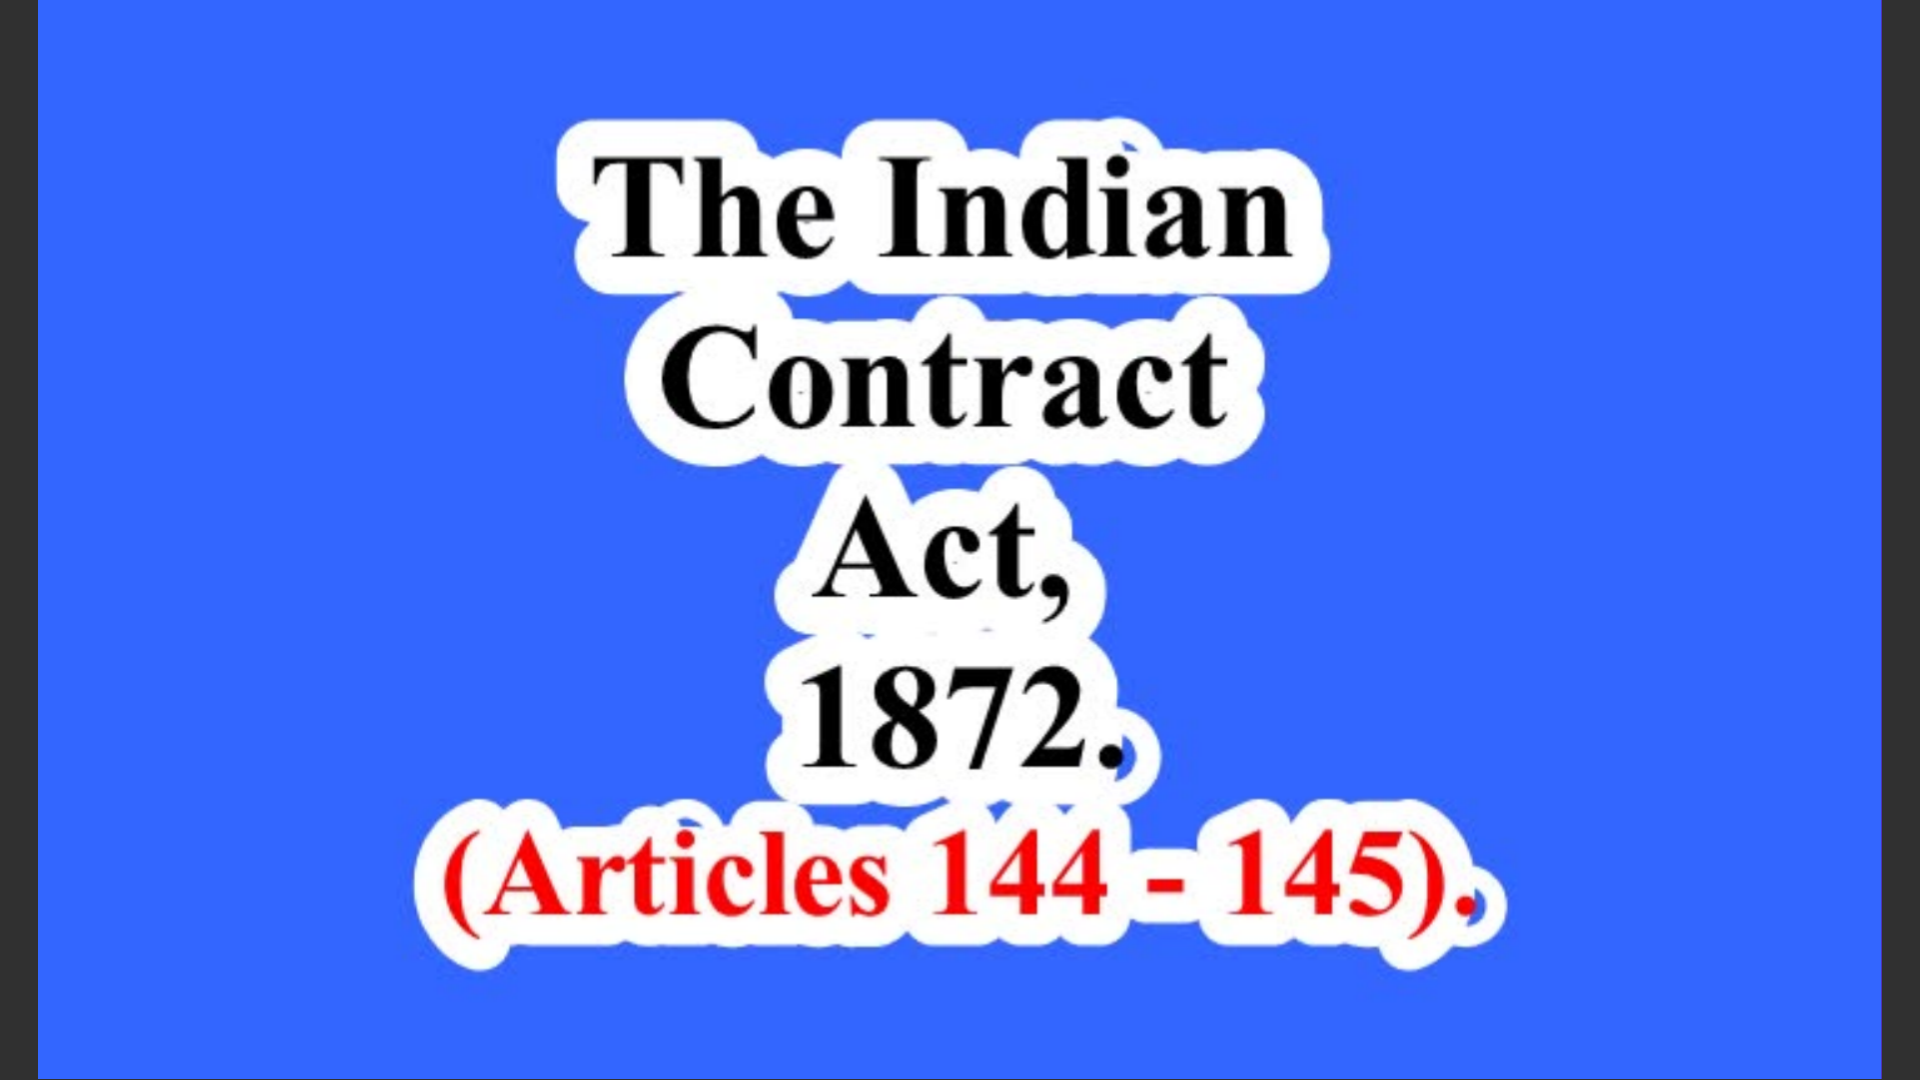 The Indian Contract Act, 1872. (Articles 144 – 145).